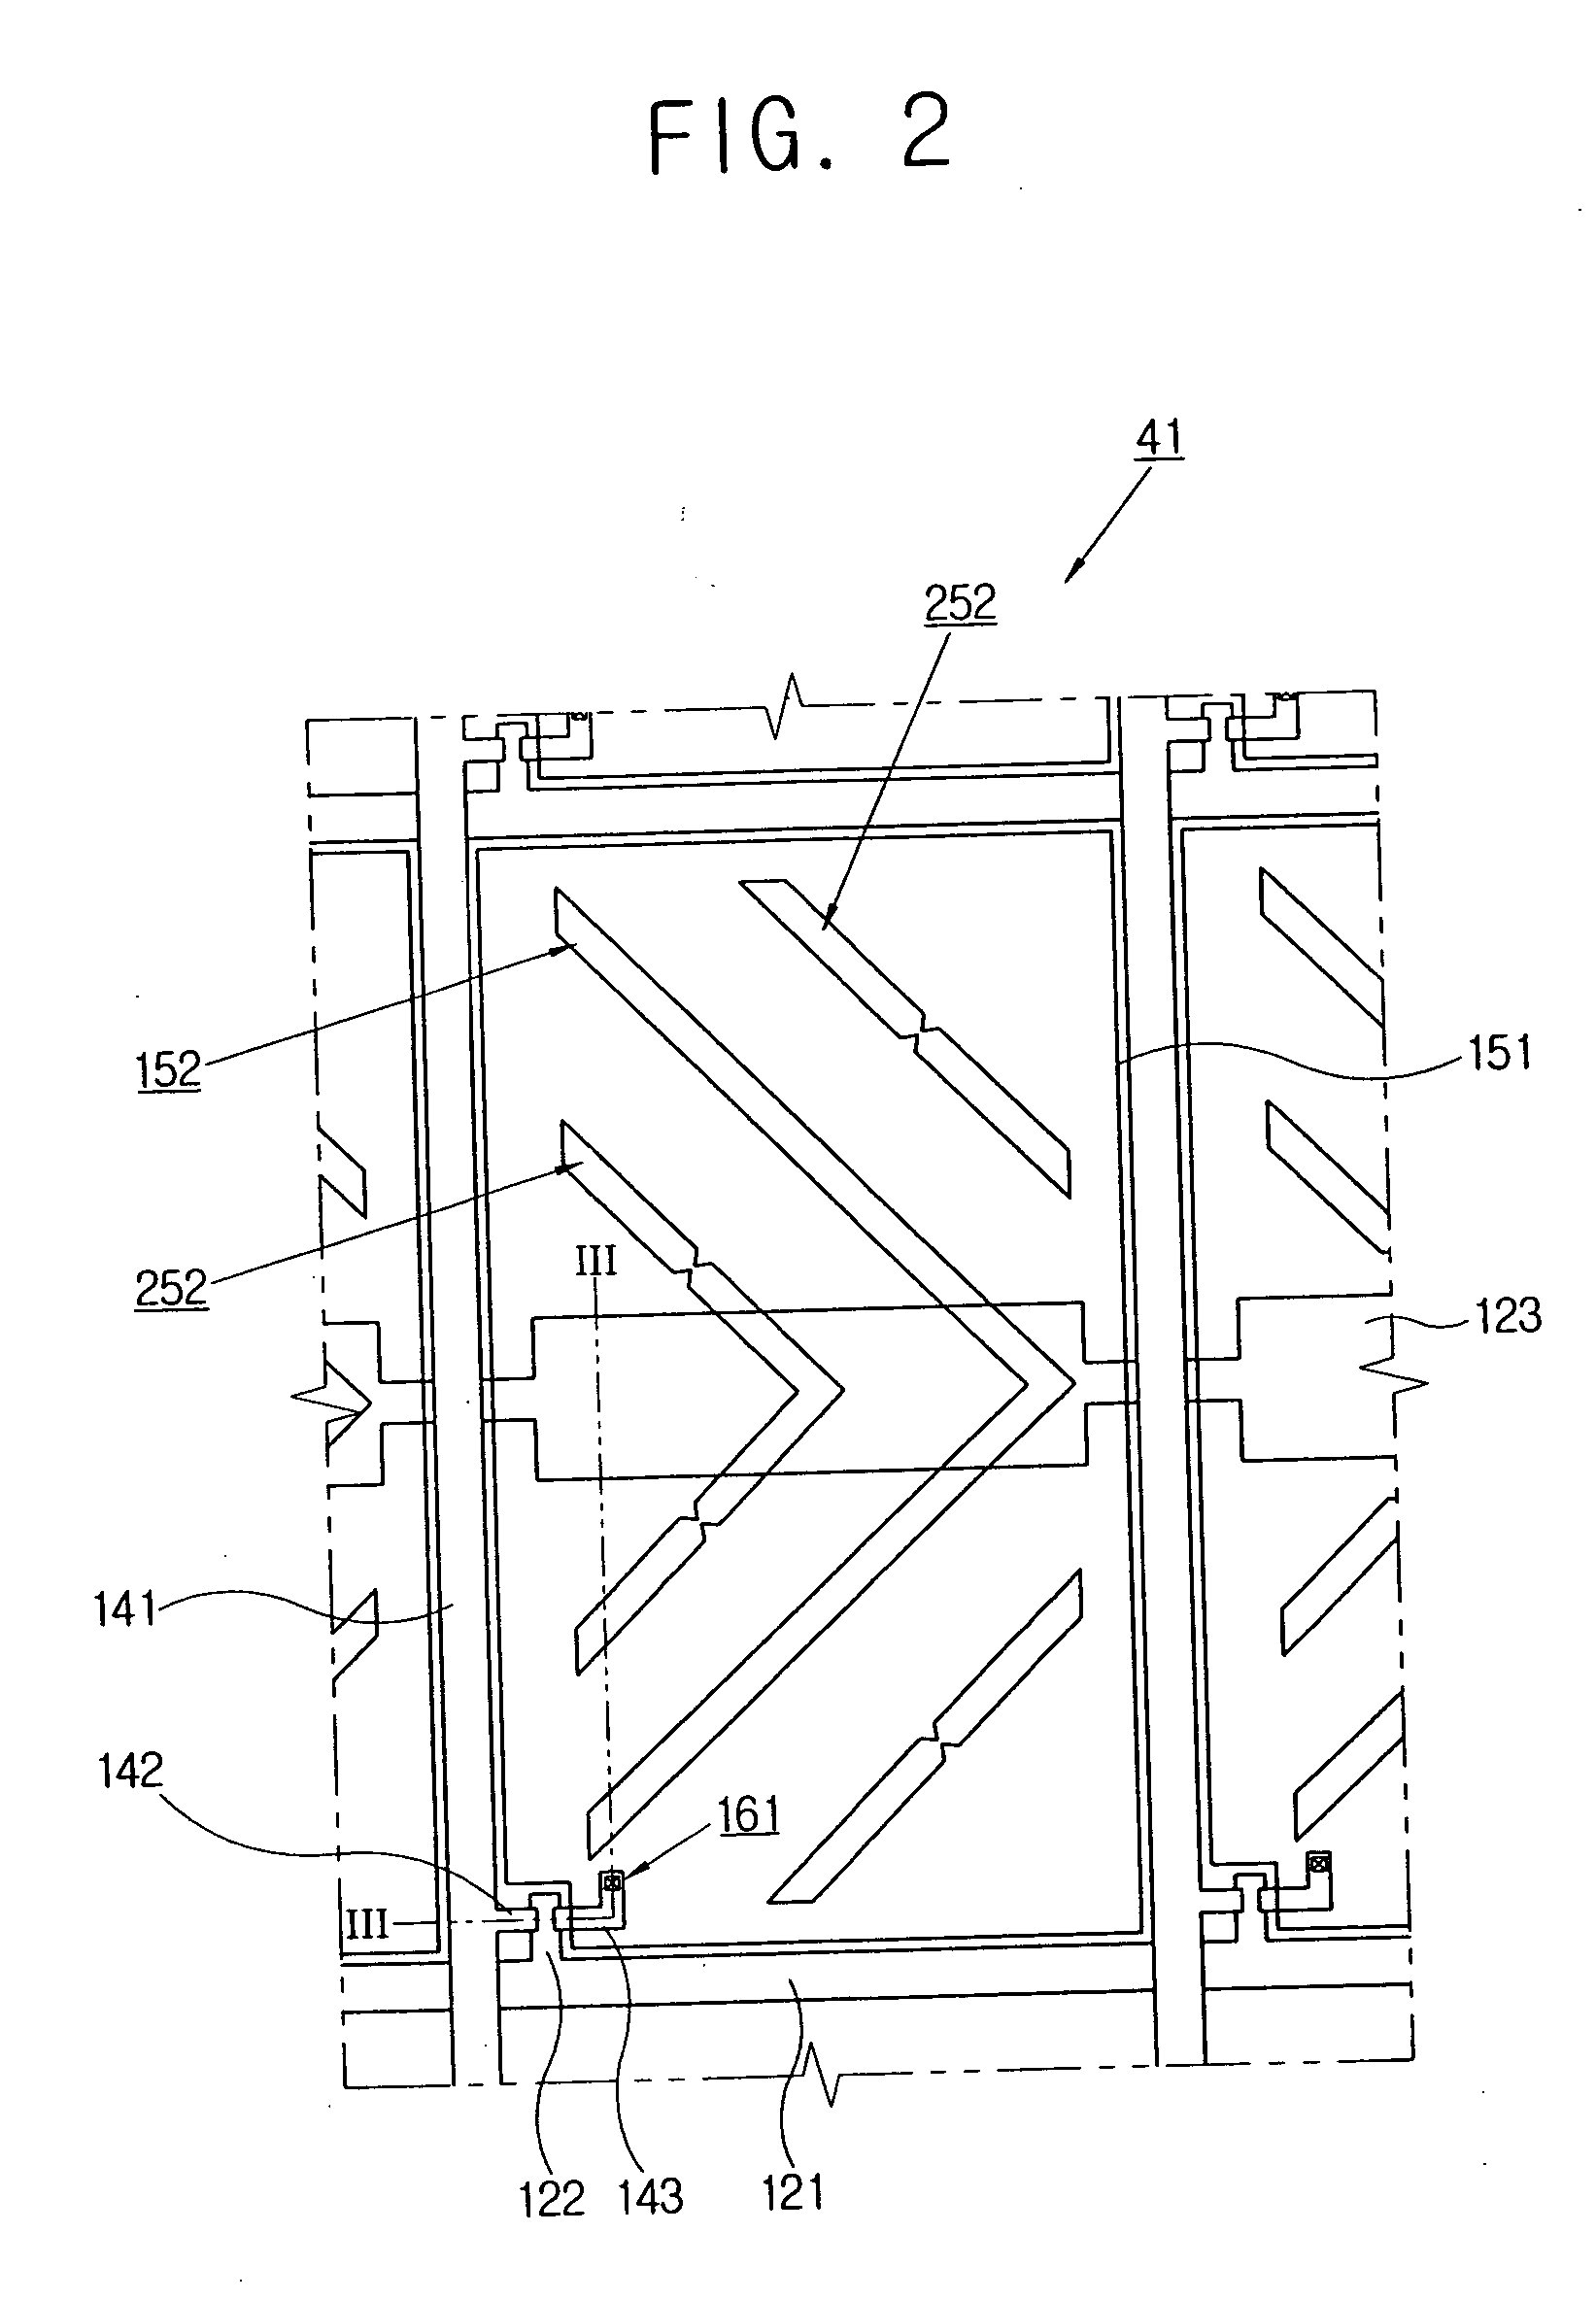 Apparatus for measuring response time and method of measuring response time using the same